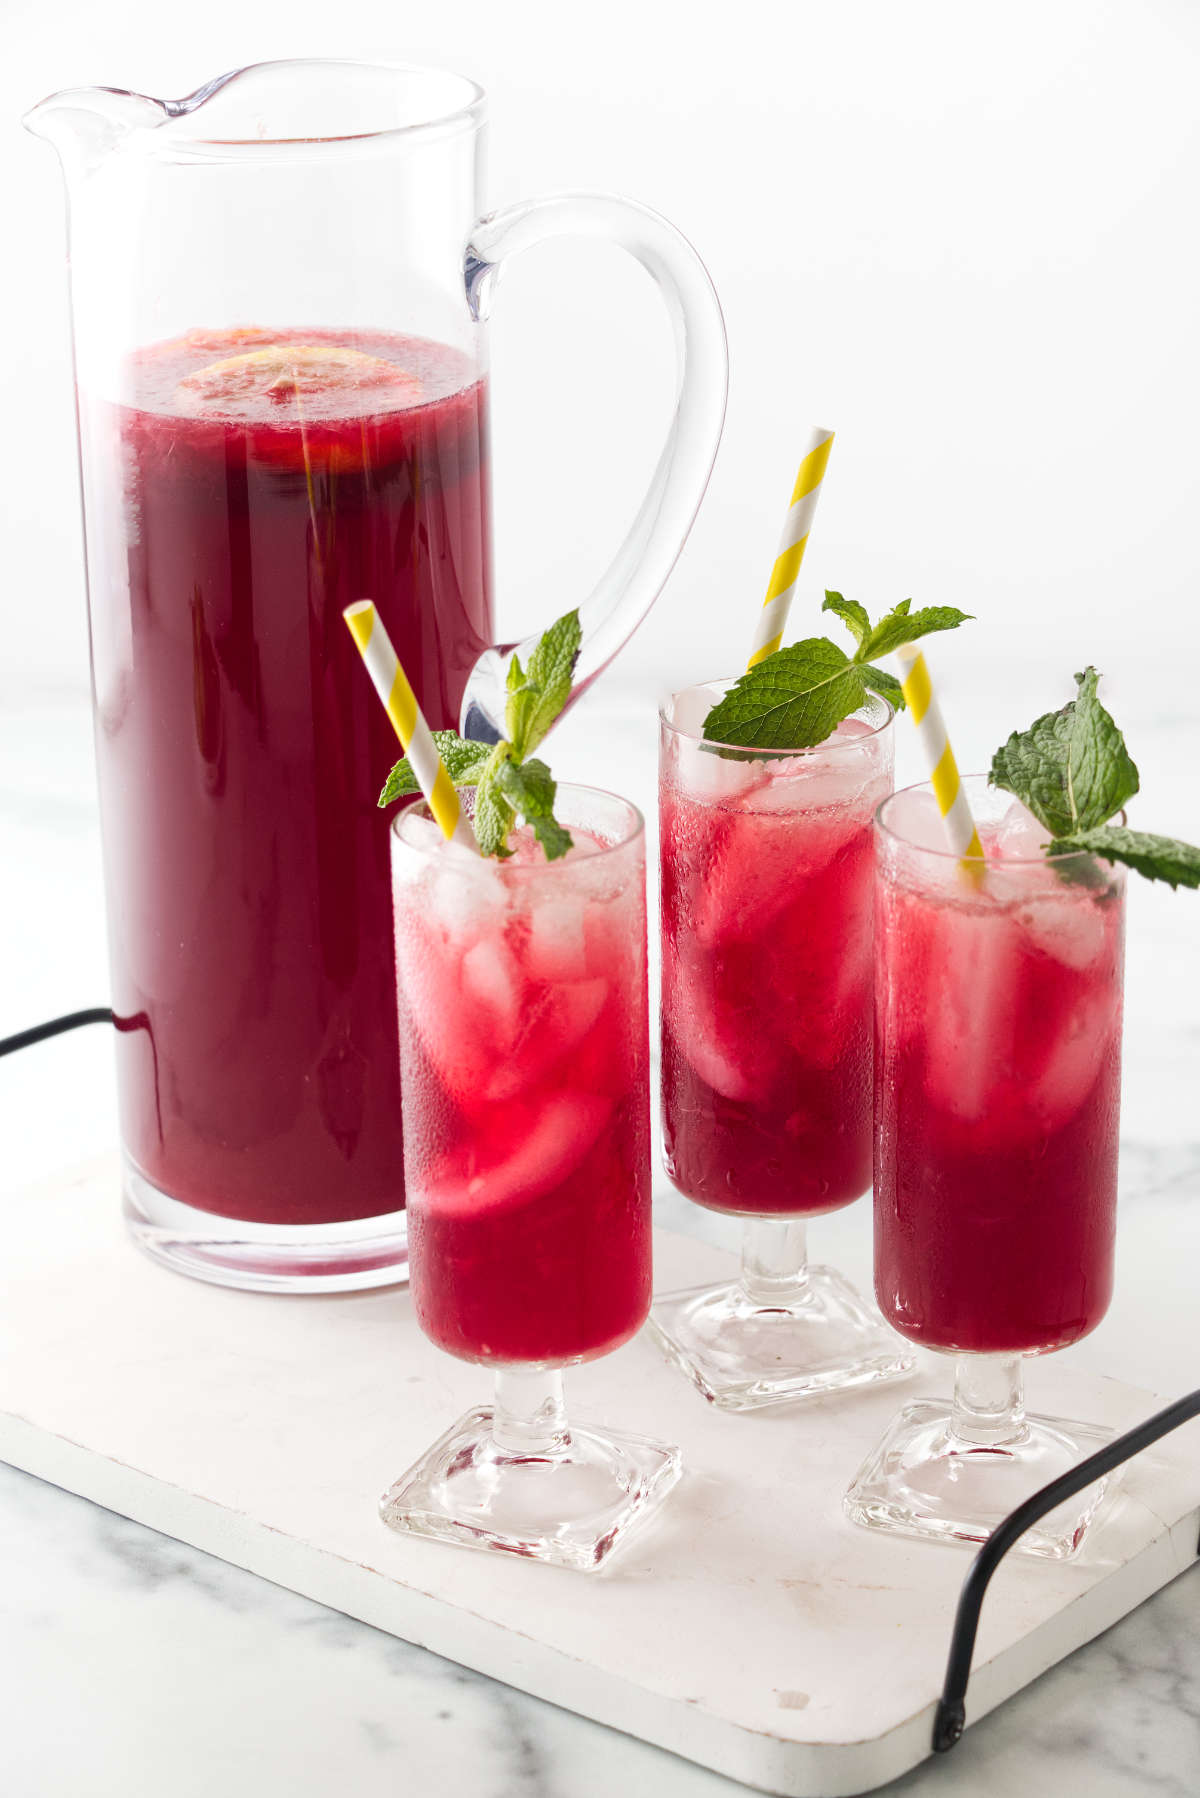 Hibiscus Mint Fruit Punch ~ Yes, more please!